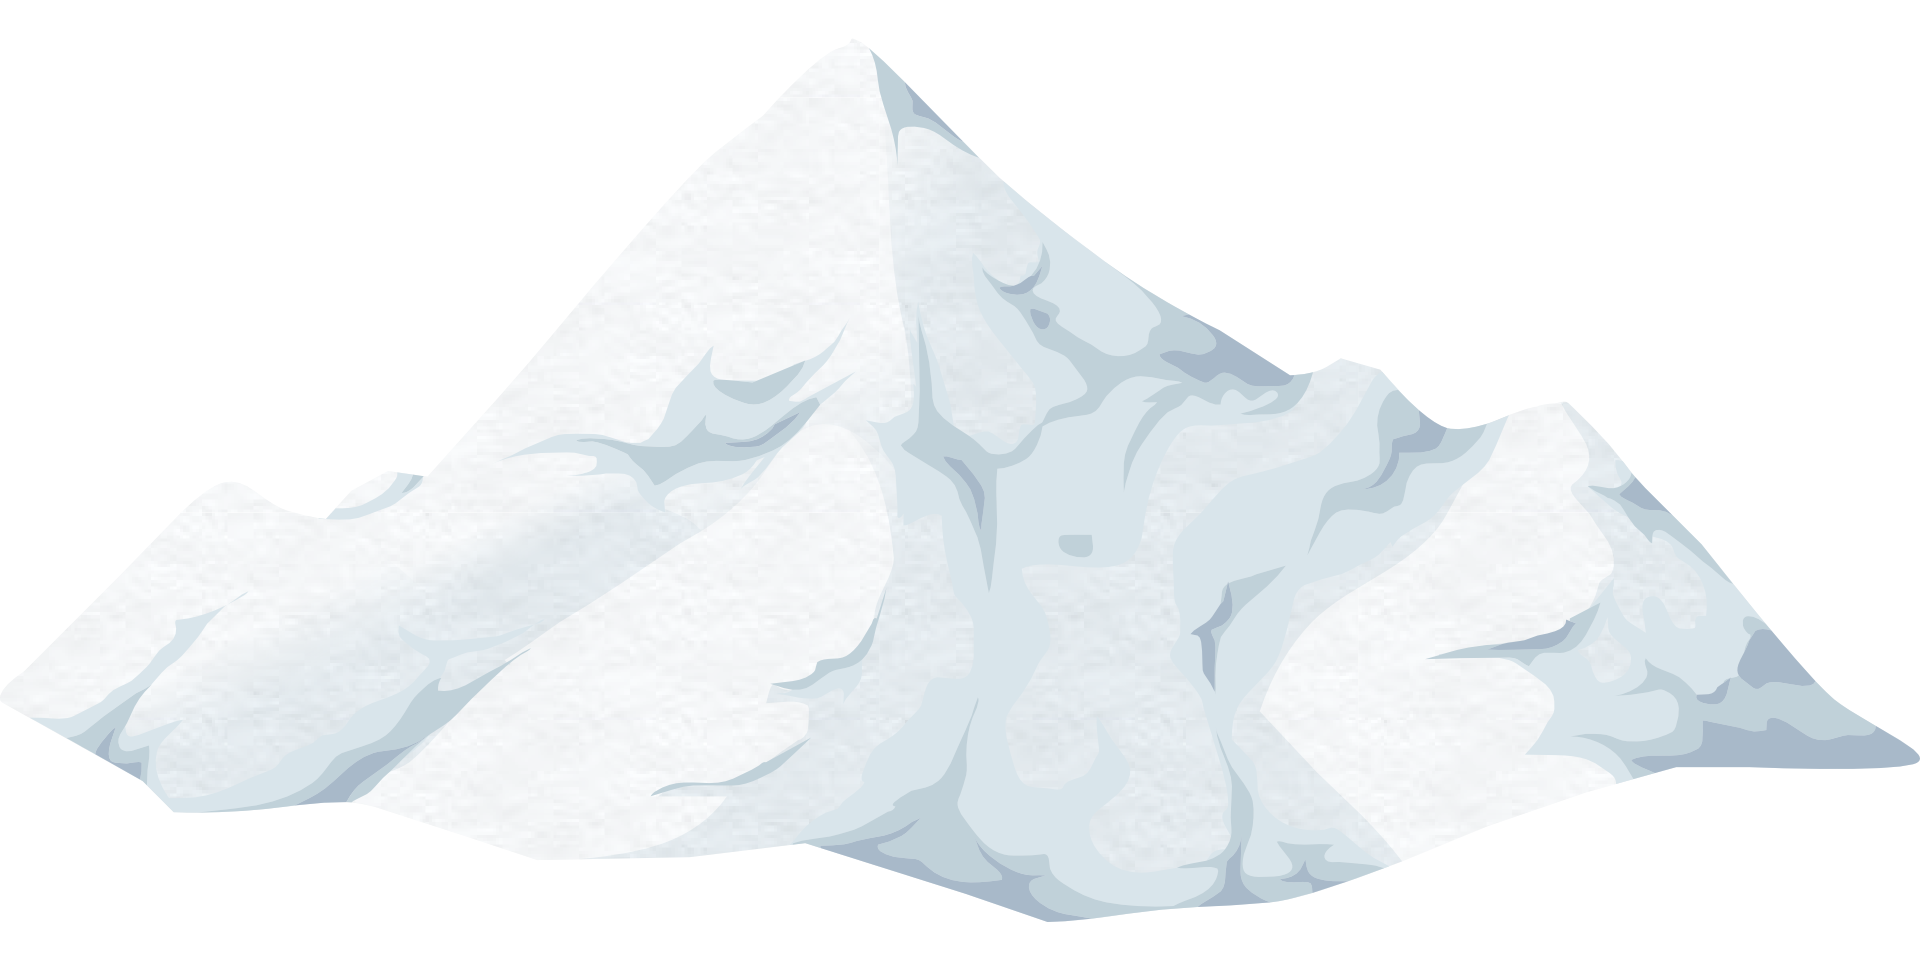 Hill mountain drawing free image download